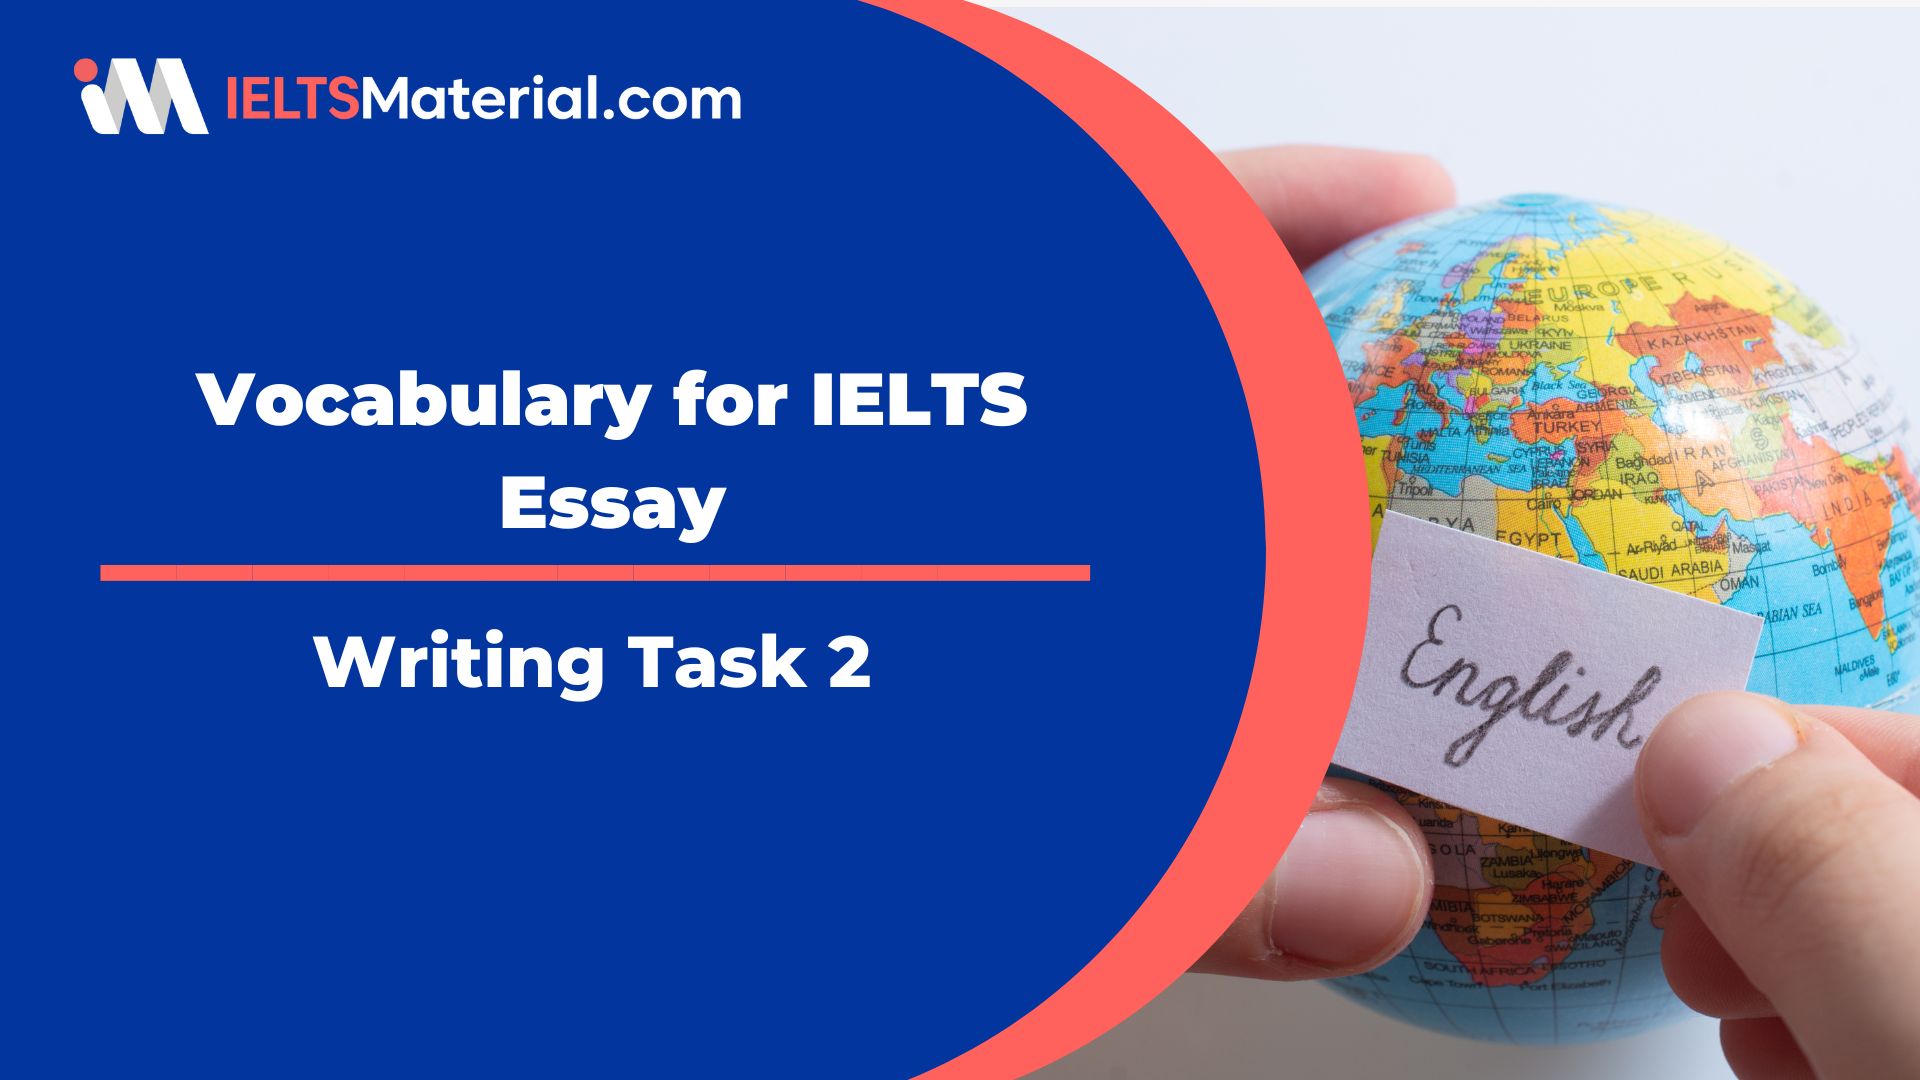 Vocabulary for IELTS Essay (Writing Task 2)